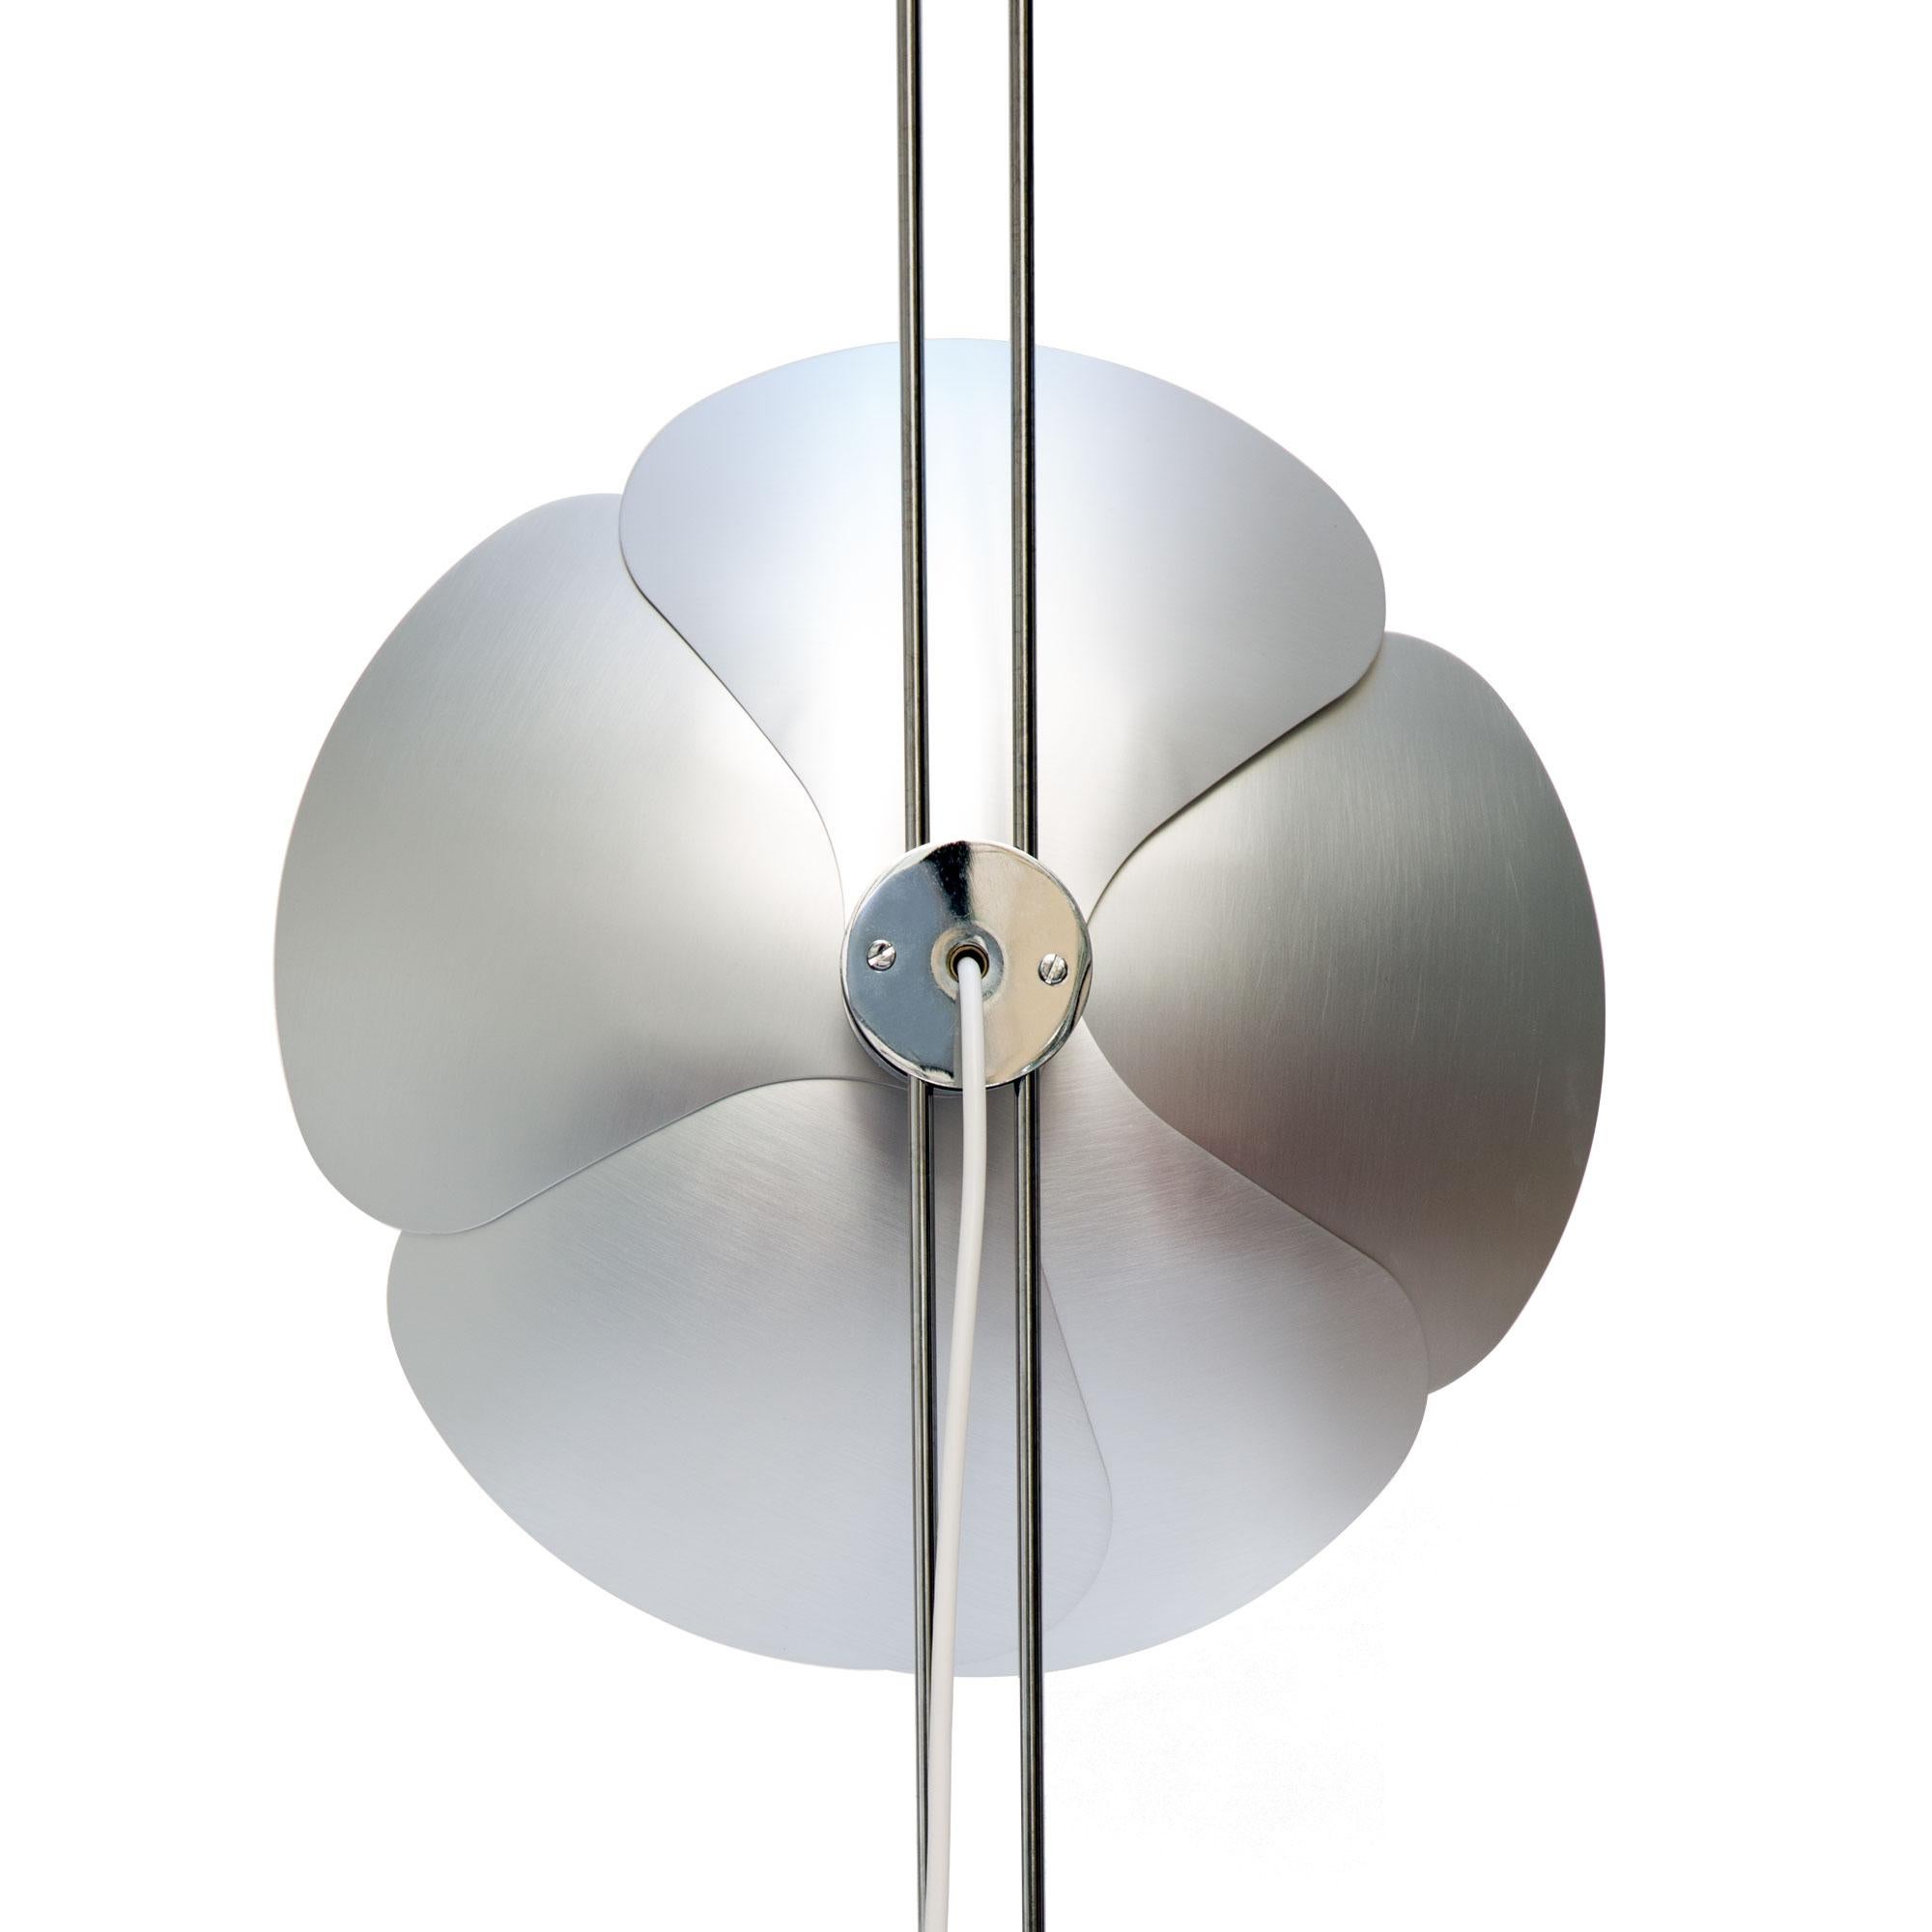 2093-80 Floor Lamp by Disderot
Limited Edition. 
Designed by Olivier Mourgue
Dimensions: Ø 34 x H 80 cm.
Materials: Polished stainless steel and aluminum.

Delivered with authentication certificate. Made in France. Custom finishes are available on